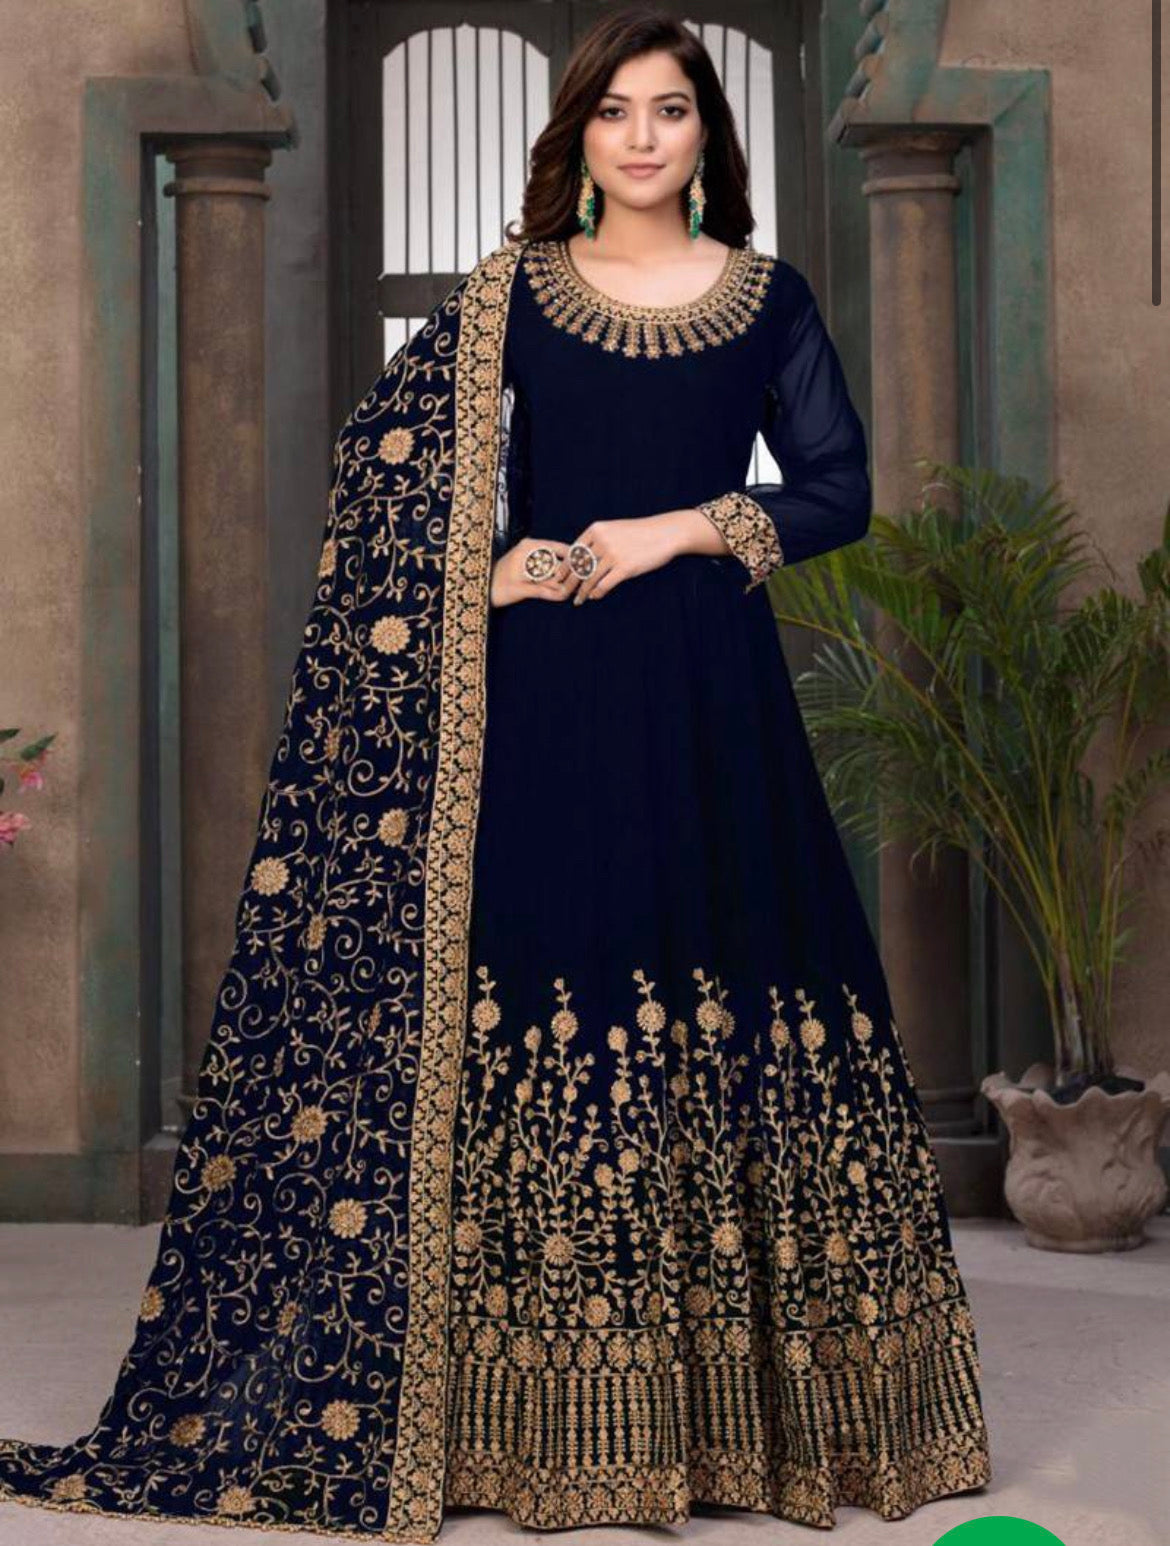 Ethnic Gowns | Dusky Blue Gown With Golden Thread Work | Freeup